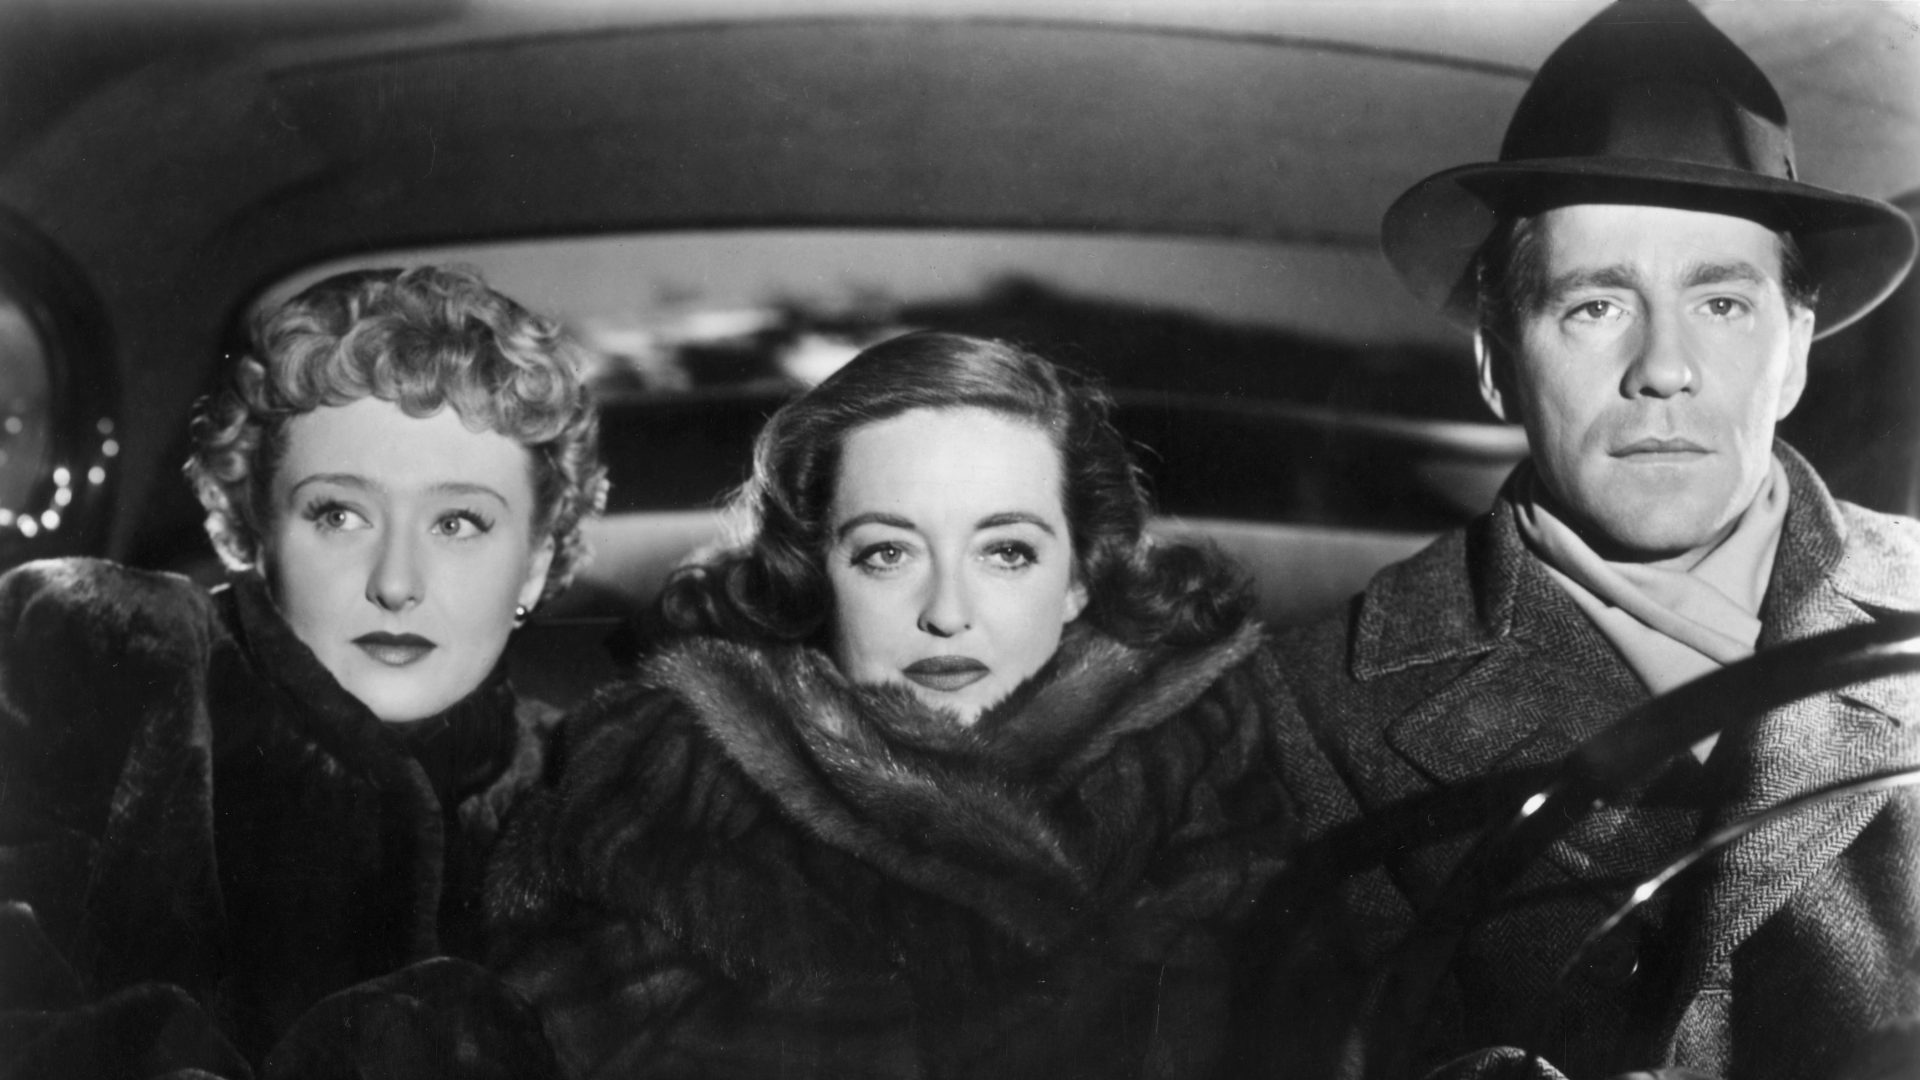 Celeste Holm, Bette Davis and Hugh Marlowe in All About Eve. Photo: Hulton Archive/Getty